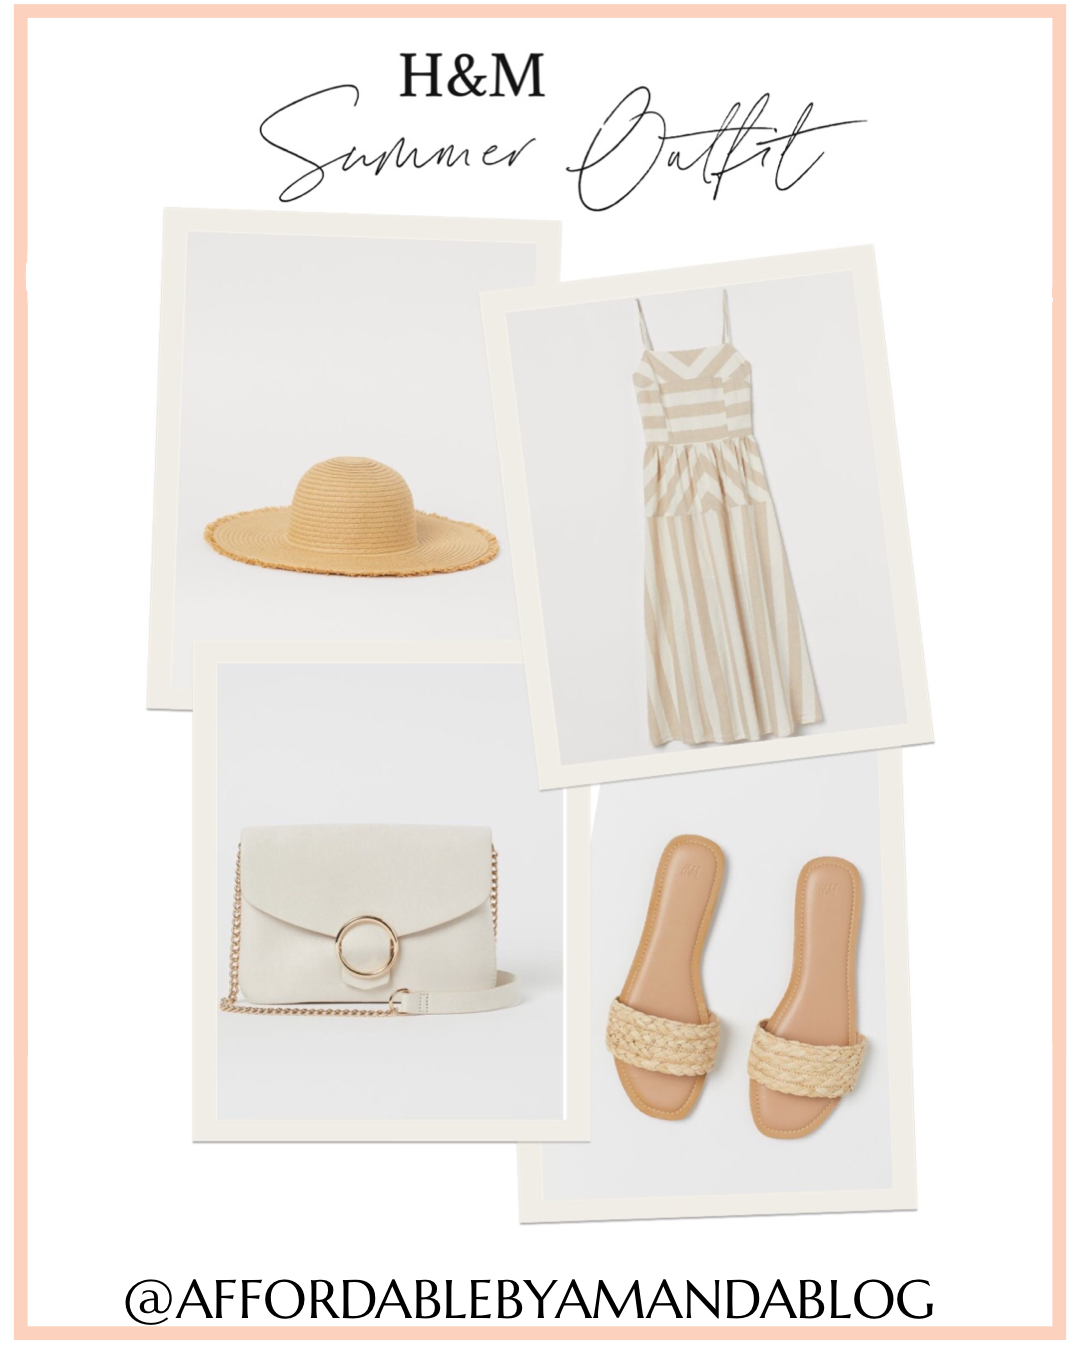 Sleeveless, calf-length dress in airy, woven fabric | Hat in braided paper straw with fringe-trimmed brim. | $17.99 Slides with a wide strap over foot. Faux leather lining and insoles. | $19.99 Small shoulder bag. Shoulder strap with chain fastening, flap with decorative metal ring